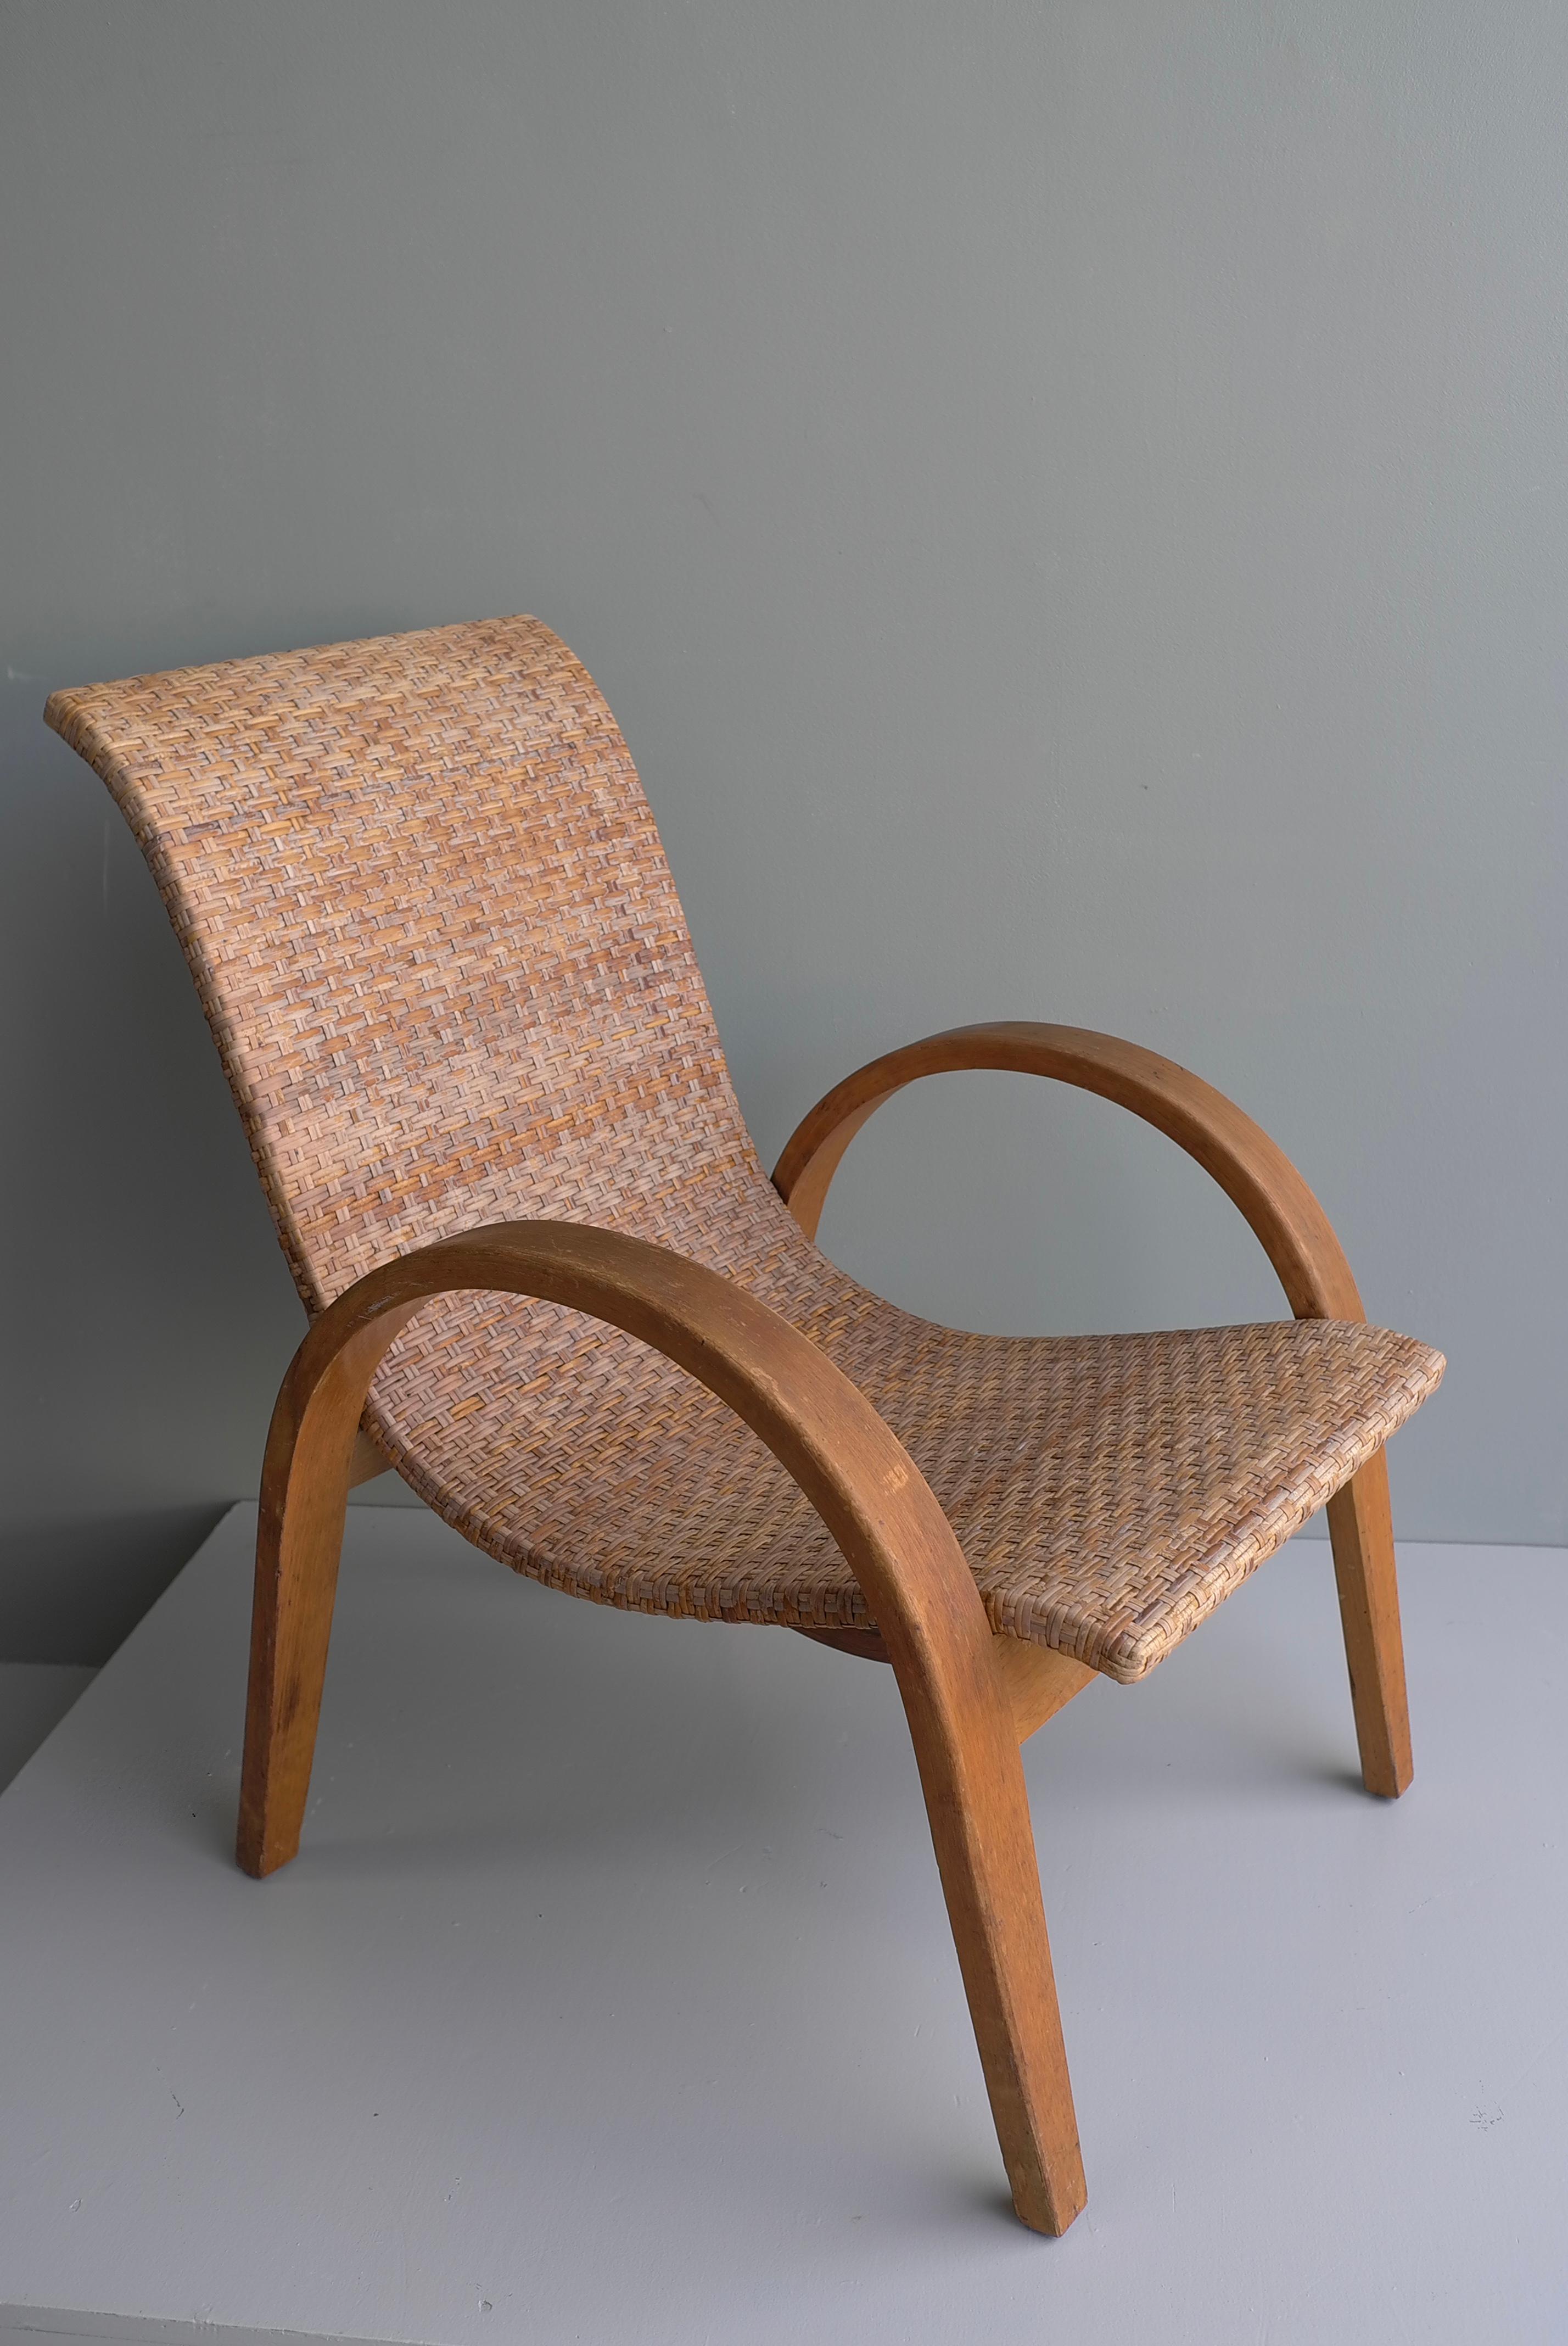 20th Century Sculptural Mid-Century Modern Armchair in Wood and Cane, 1950's For Sale